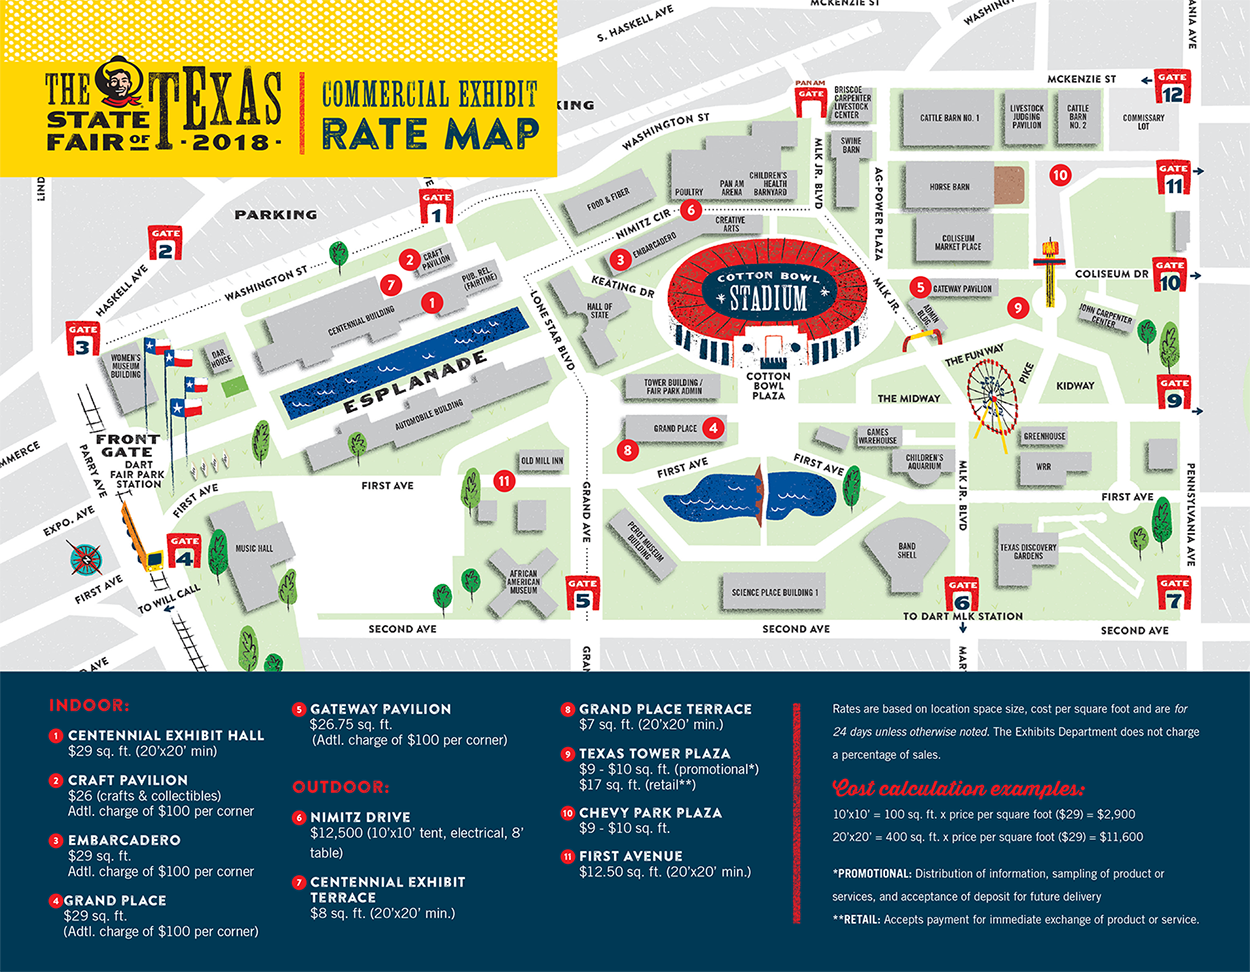 state fair of texas map 2018 Exhibitors Rate Map State Fair Of Texas state fair of texas map